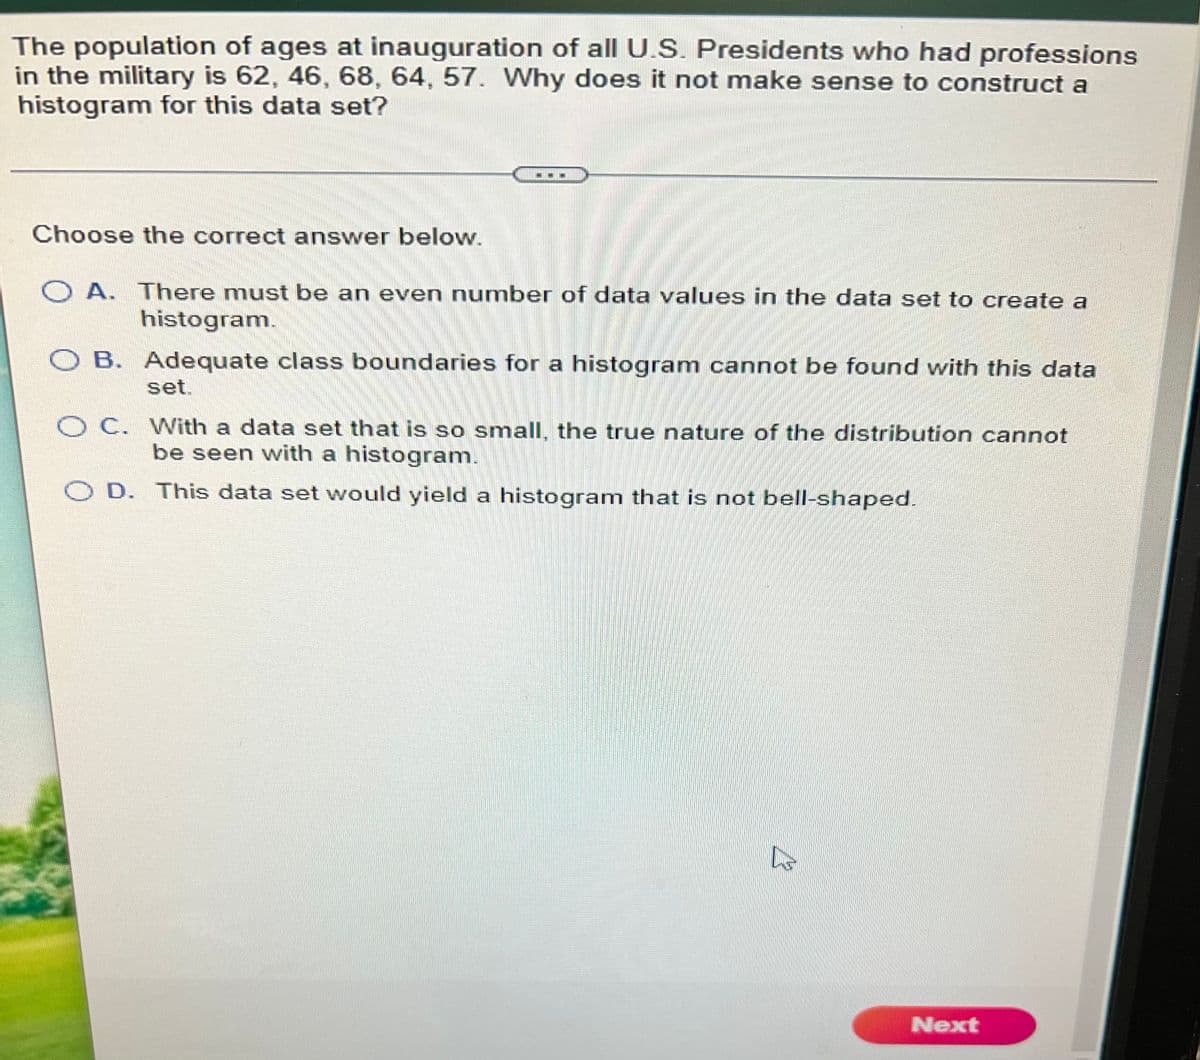 The population of ages at inauguration of all U.S. Presidents who had professions
in the military is 62, 46, 68, 64, 57. Why does it not make sense to construct a
histogram for this data set?
Choose the correct answer below.
O A. There must be an even number of data values in the data set to create a
histogram.
O B. Adequate class boundaries for a histogram cannot be found with this data
set.
O C. With a data set that is so small, the true nature of the distribution cannot
be seen with a histogram.
D. This data set would yield a histogram that is not bell-shaped.
Next
